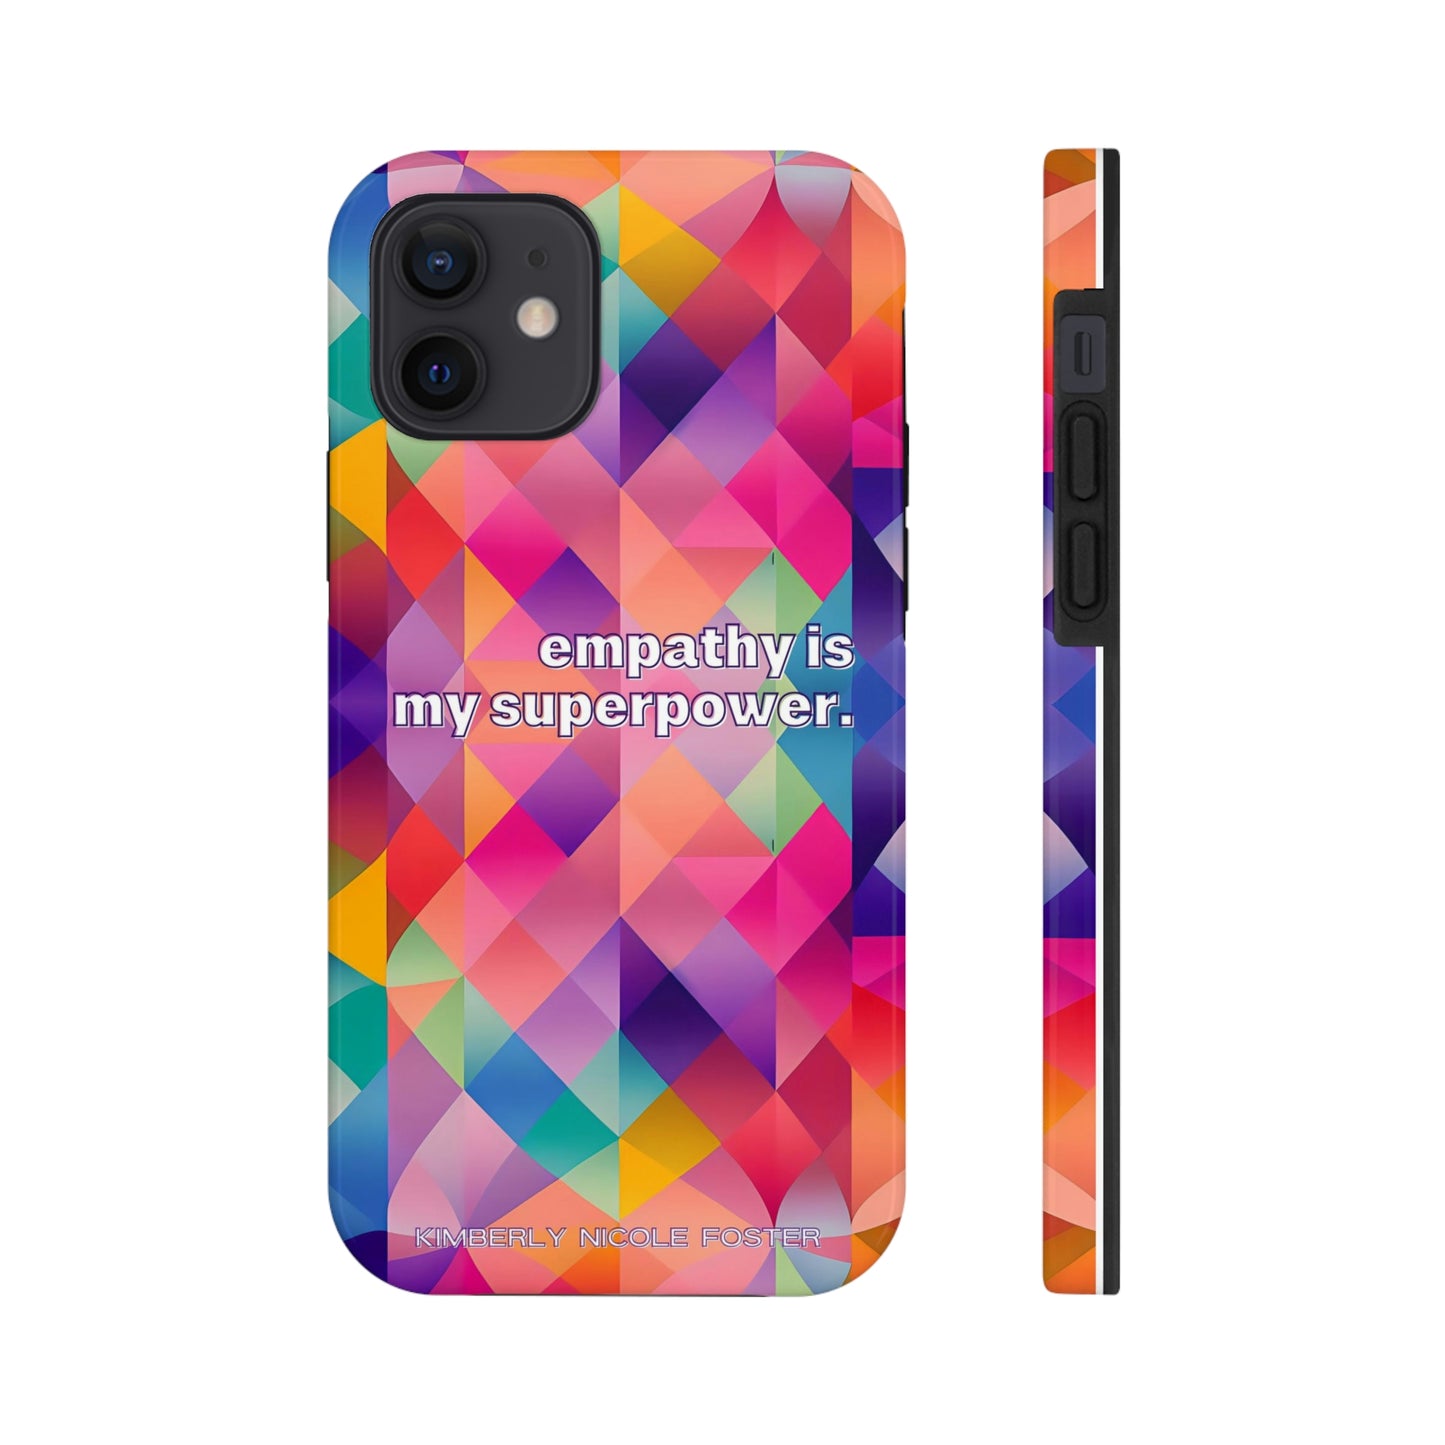 Empathy is my superpower. iPhone case